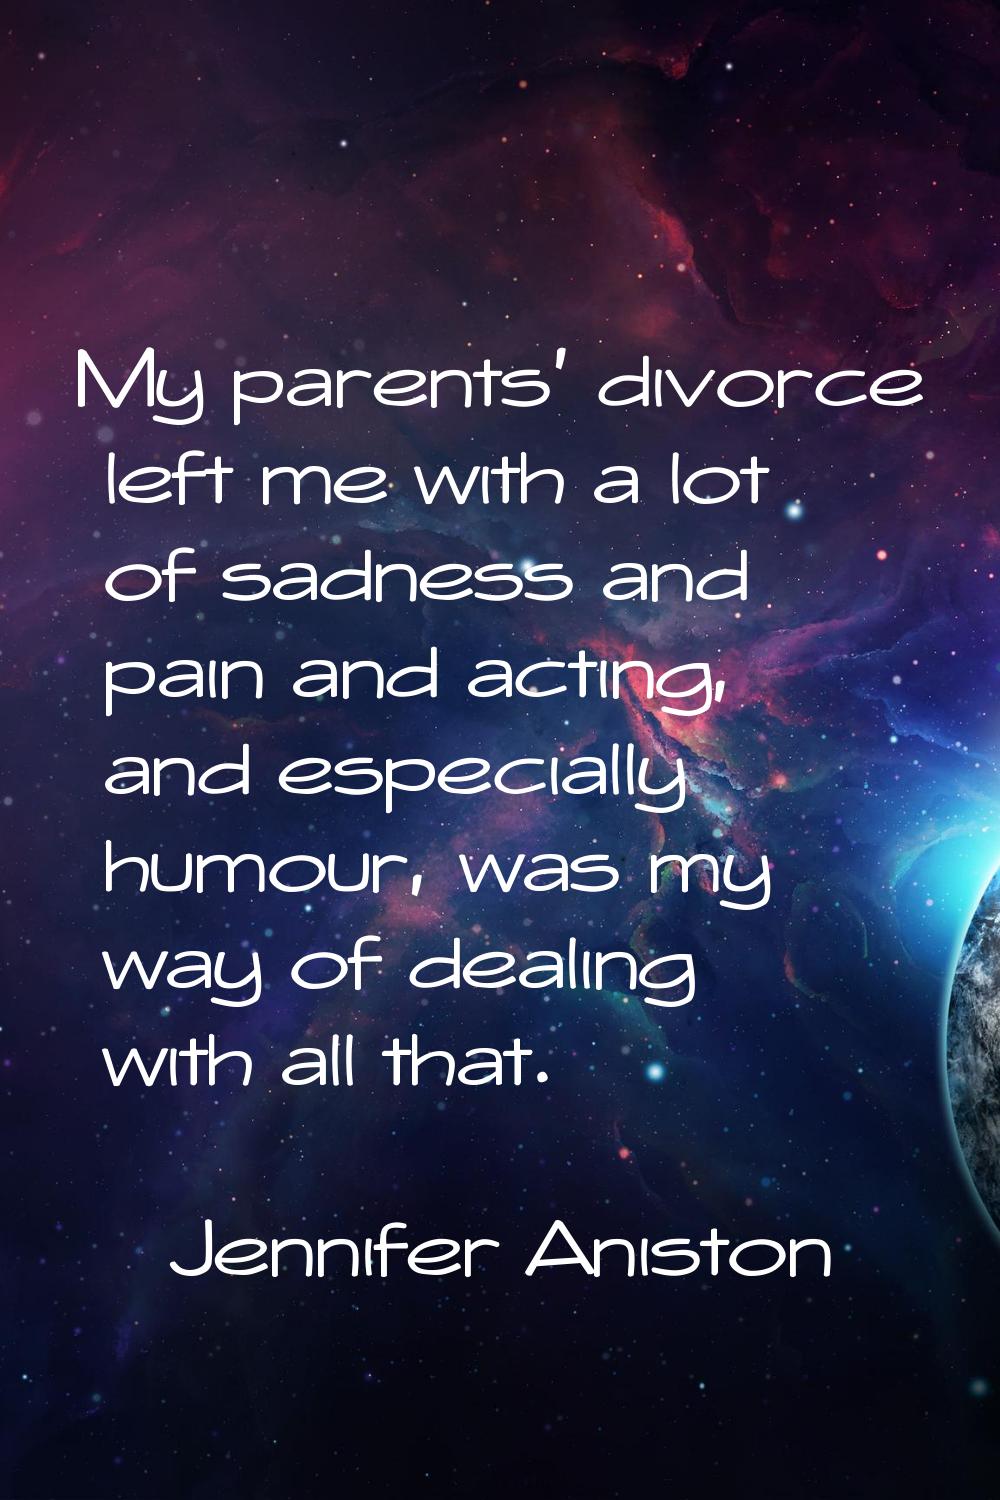 My parents' divorce left me with a lot of sadness and pain and acting, and especially humour, was m